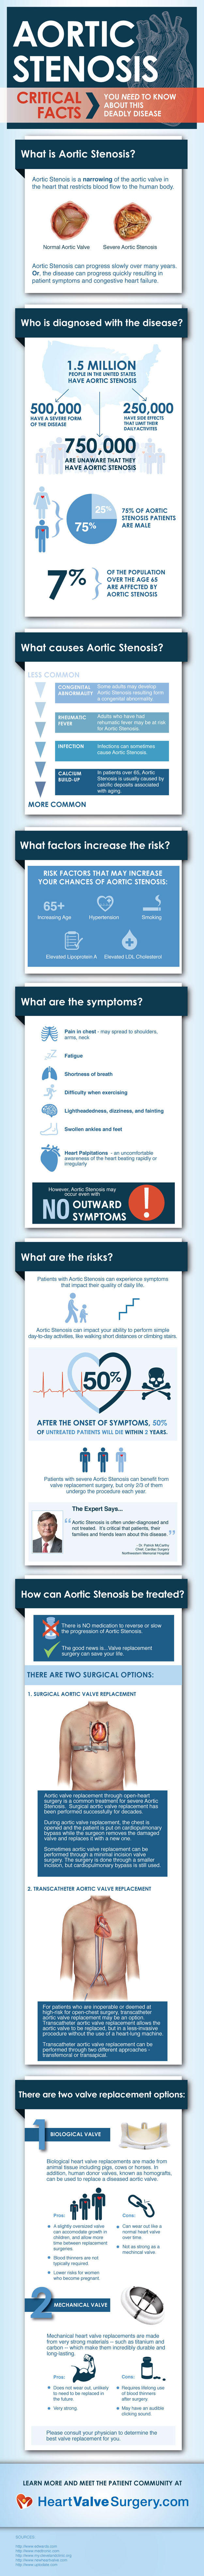 Aortic Stenosis Infographic